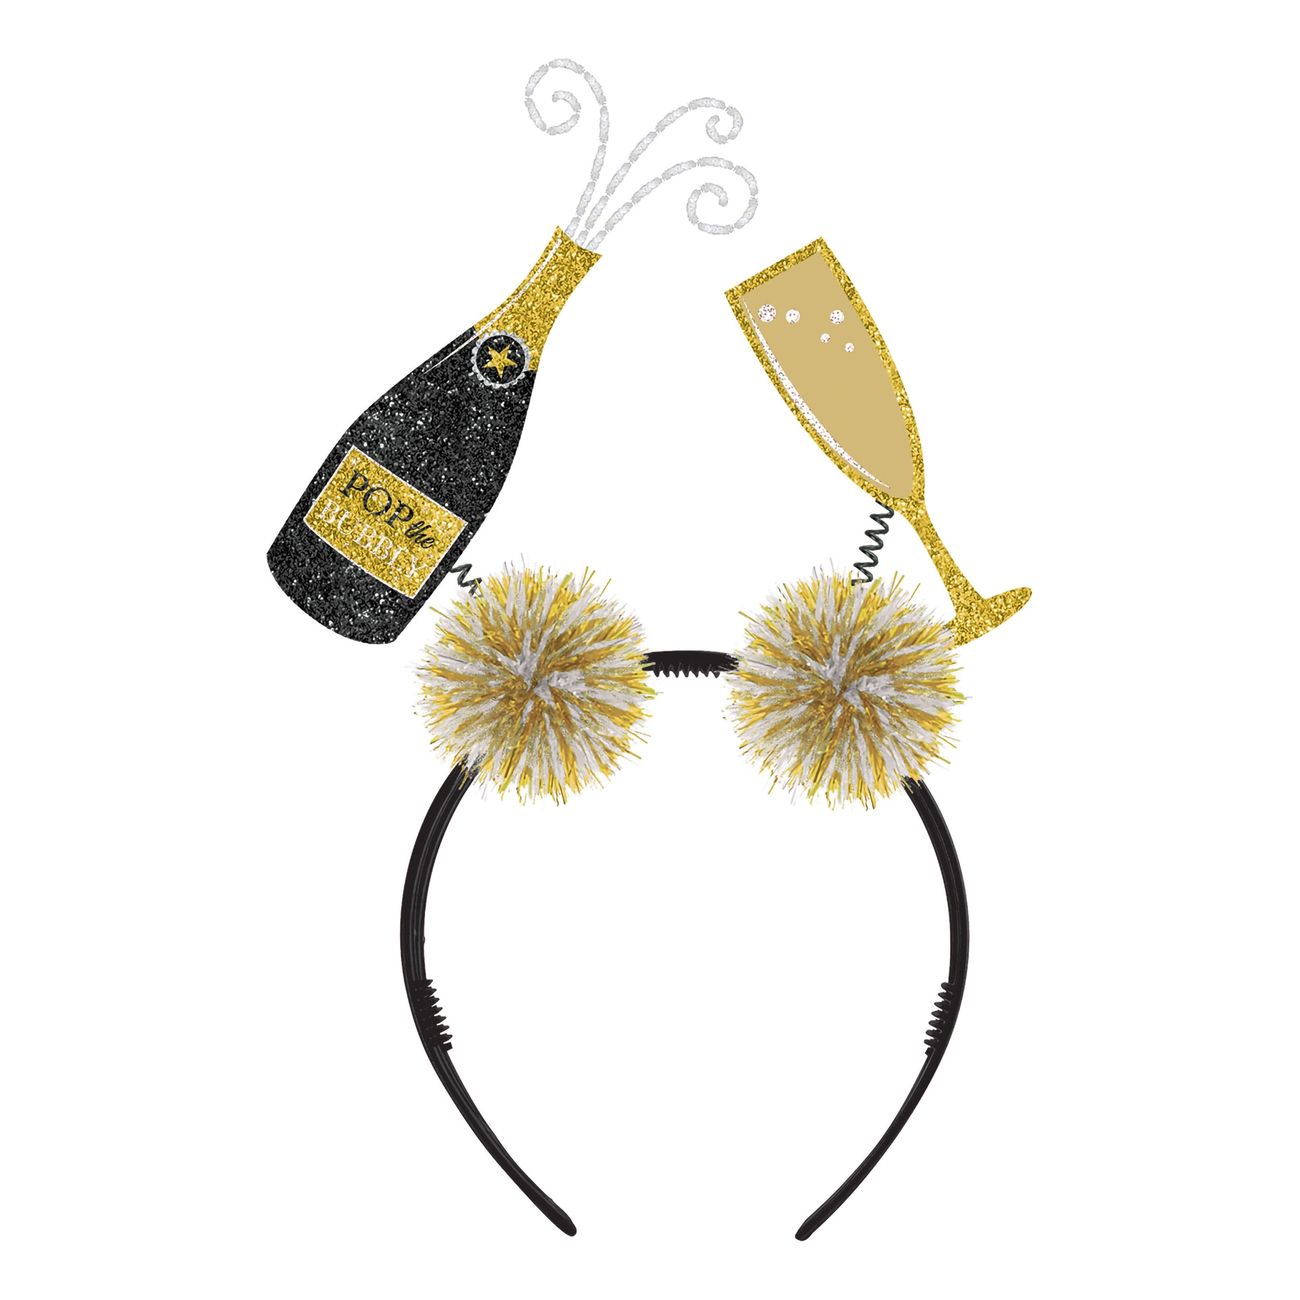 boppers-champagne-glas-102626-1